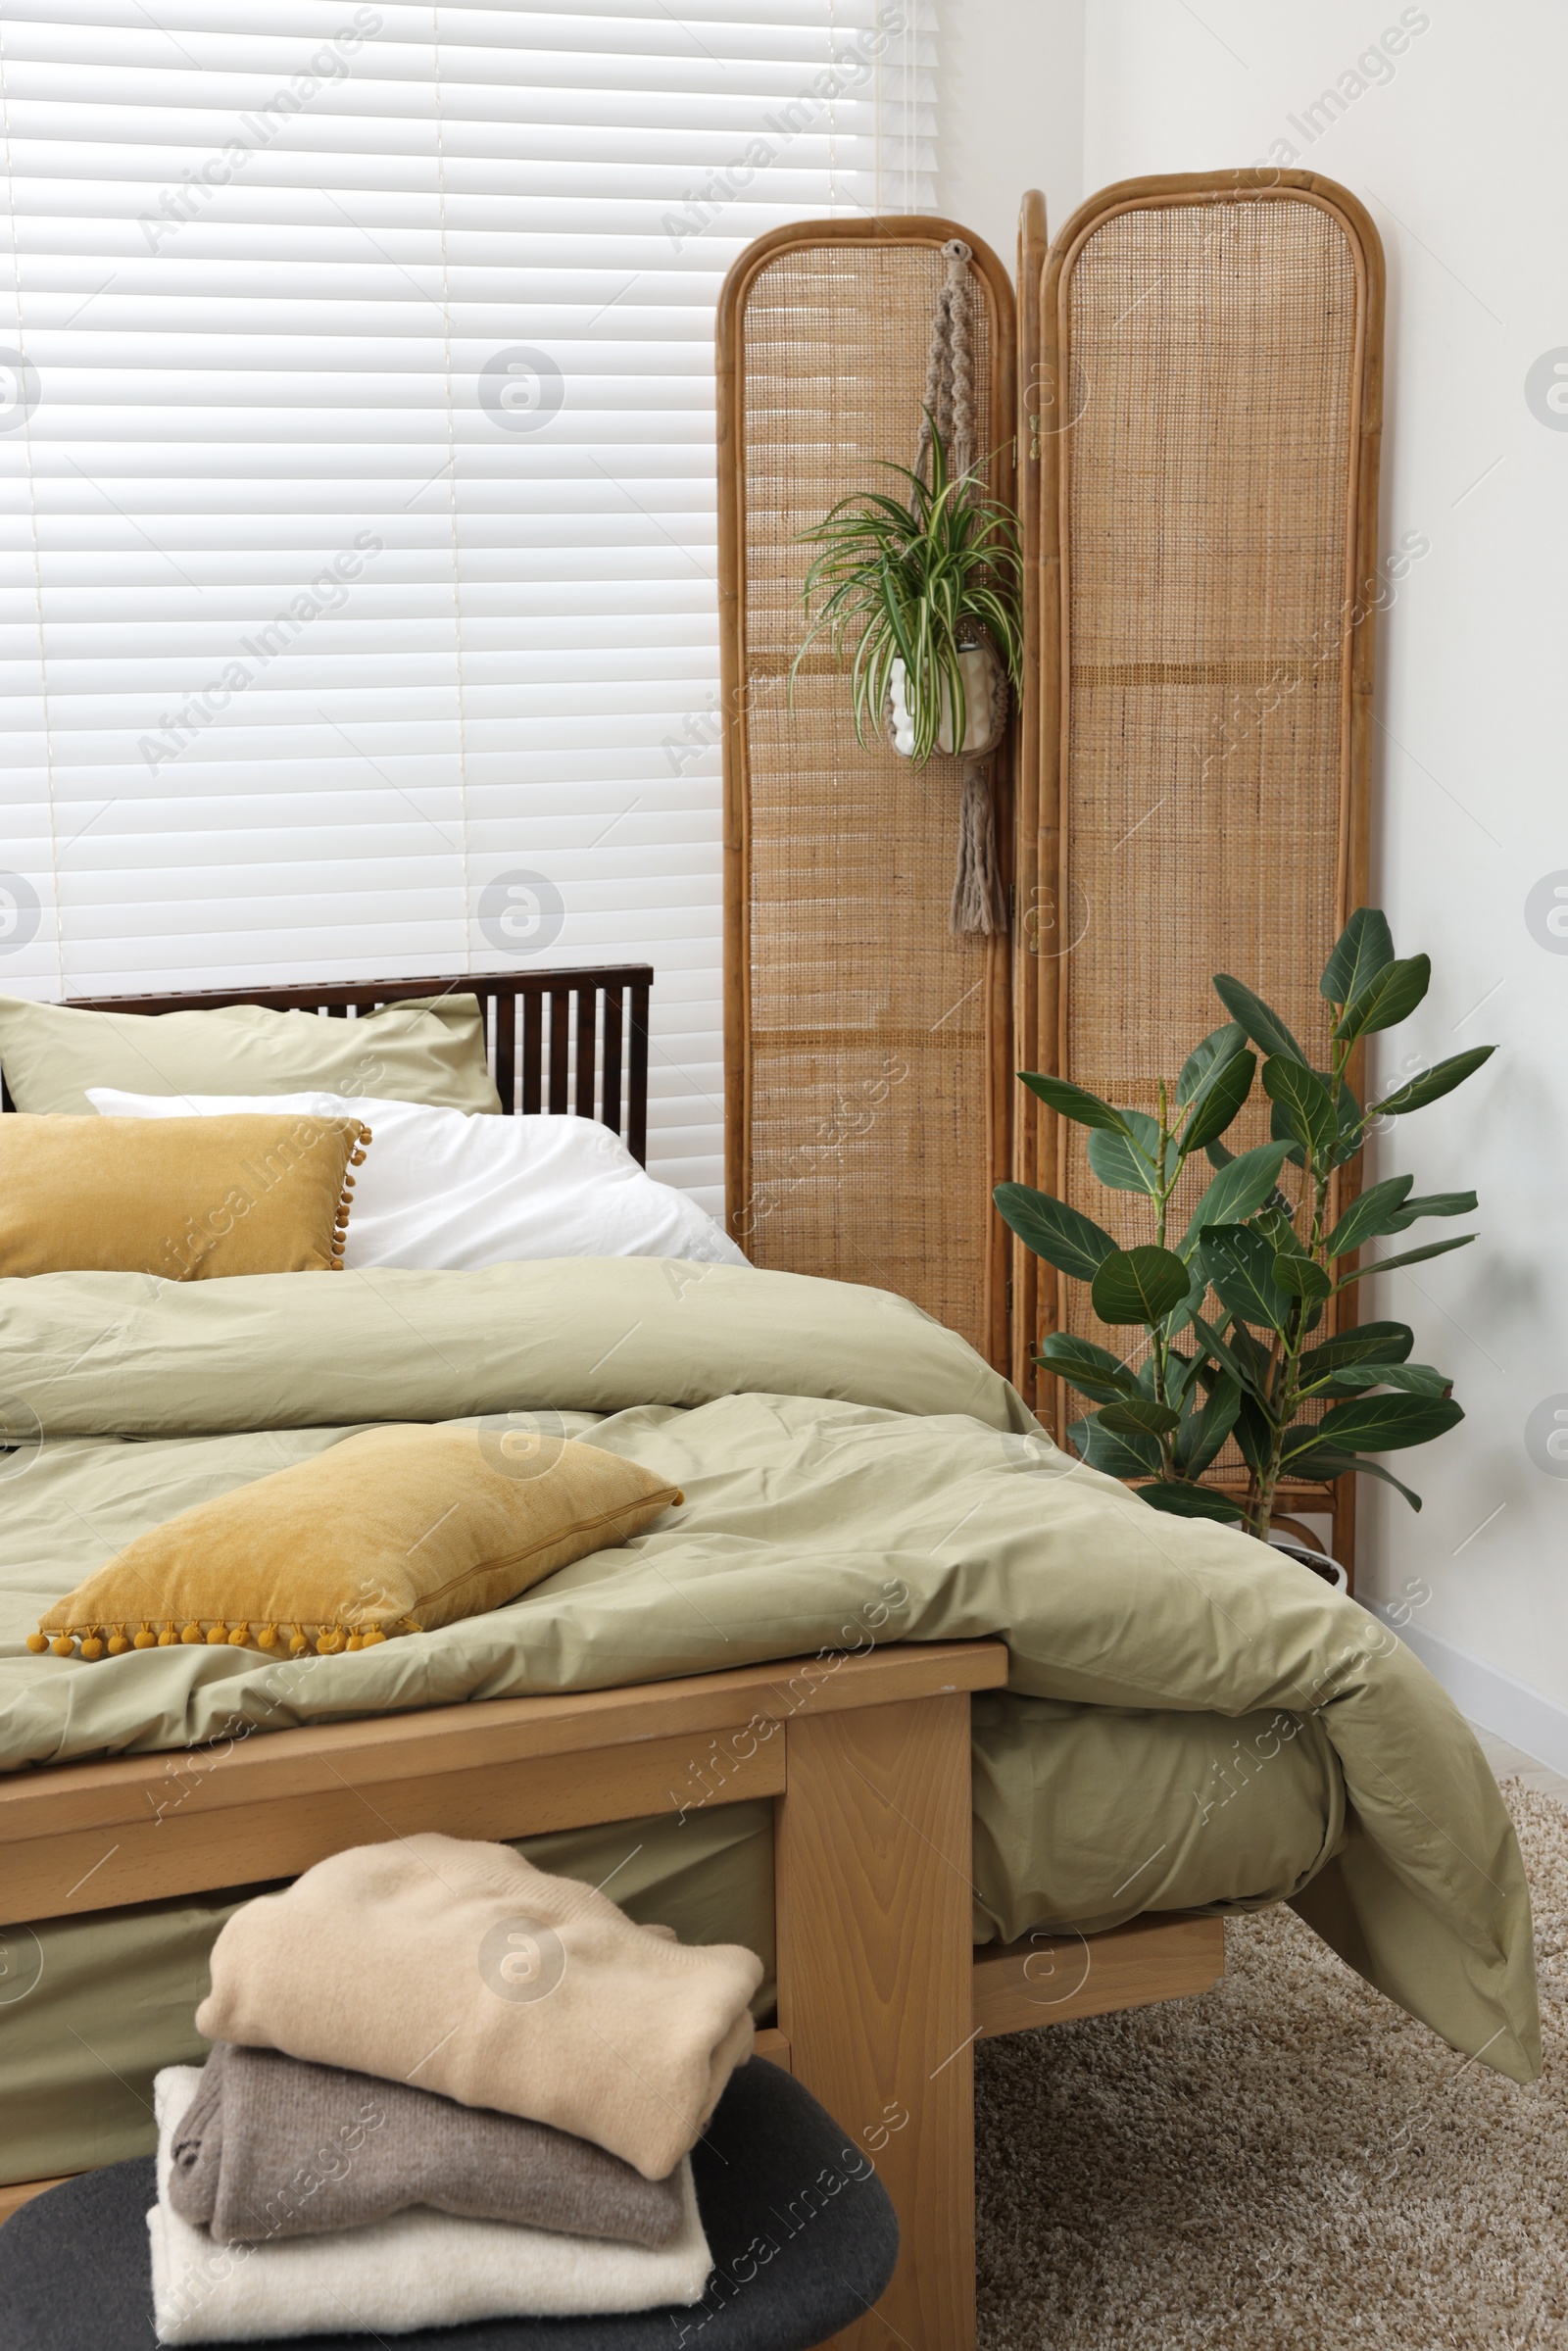 Photo of Comfortable bed and beautiful green houseplants in bedroom